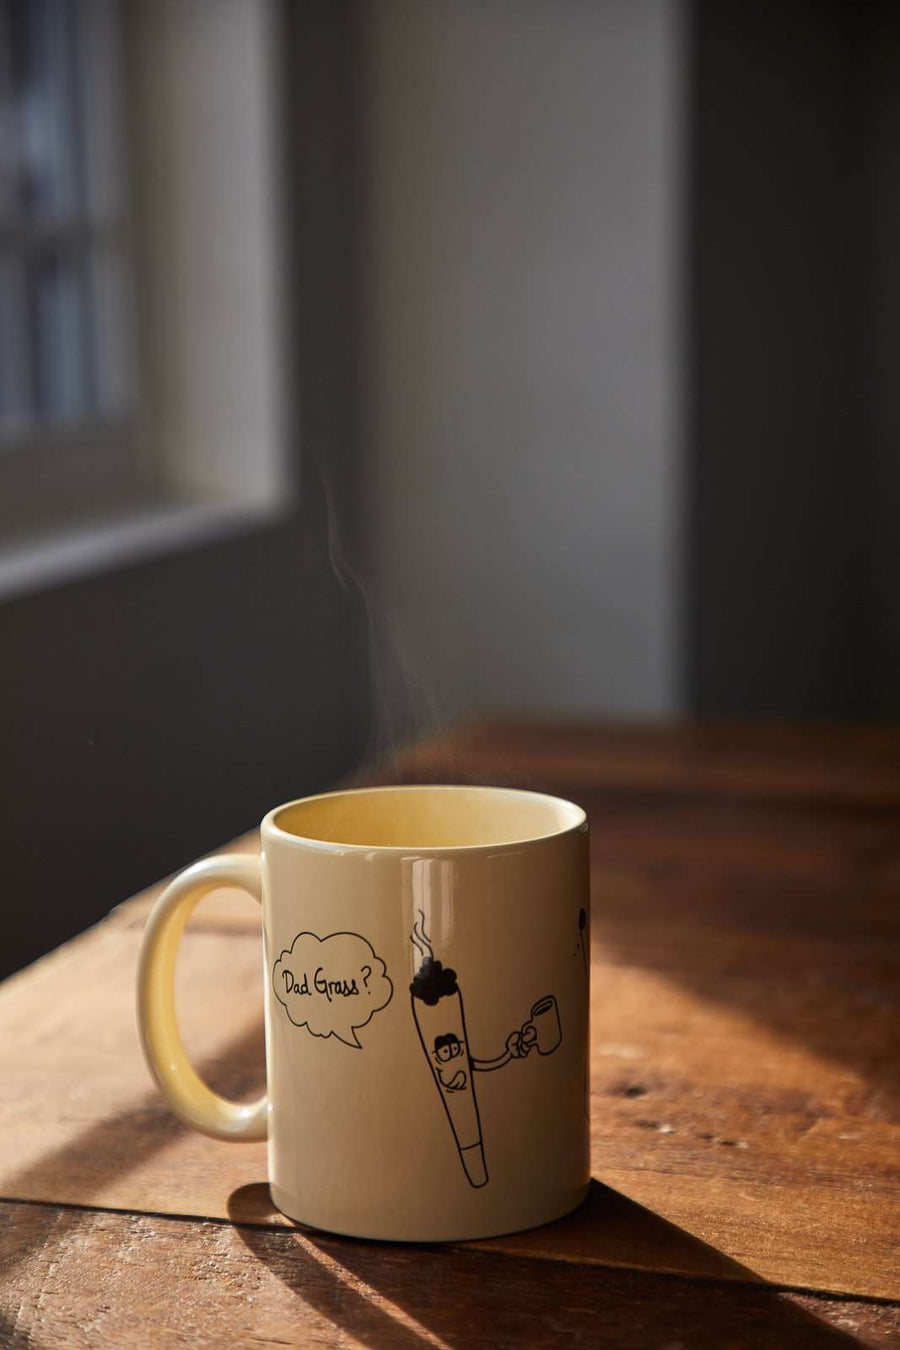 Dad Grass x Yes Plz Coffee mug on wooden surface